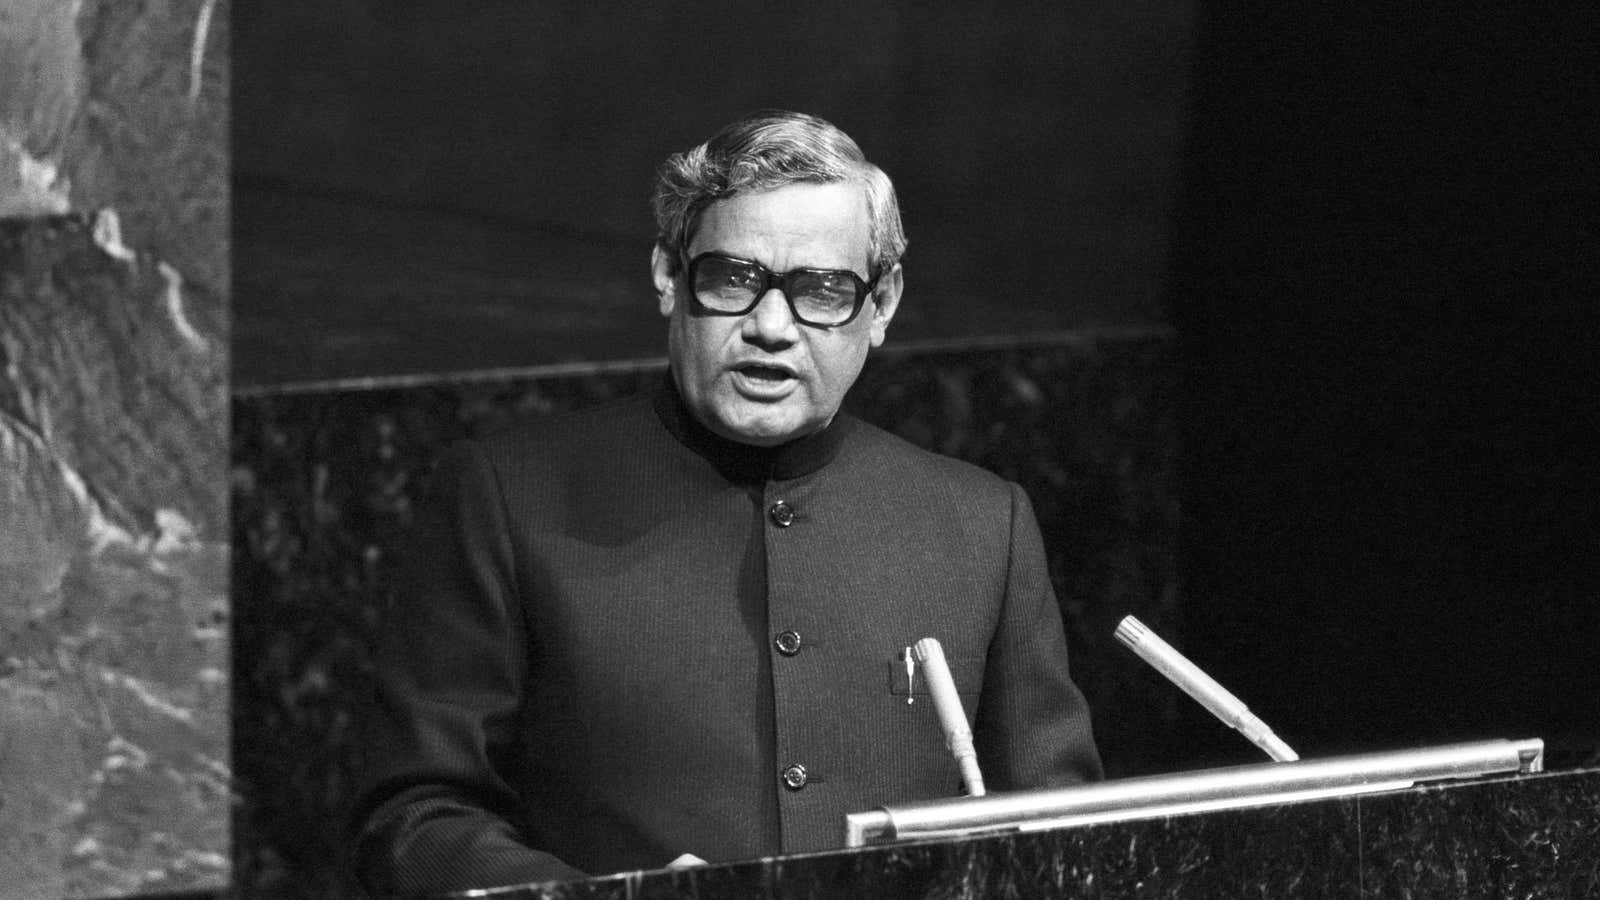 Atal Bihari Vajpayee, then India’s foreign minister, addressing the Assembly on Oct. 04, 1977.